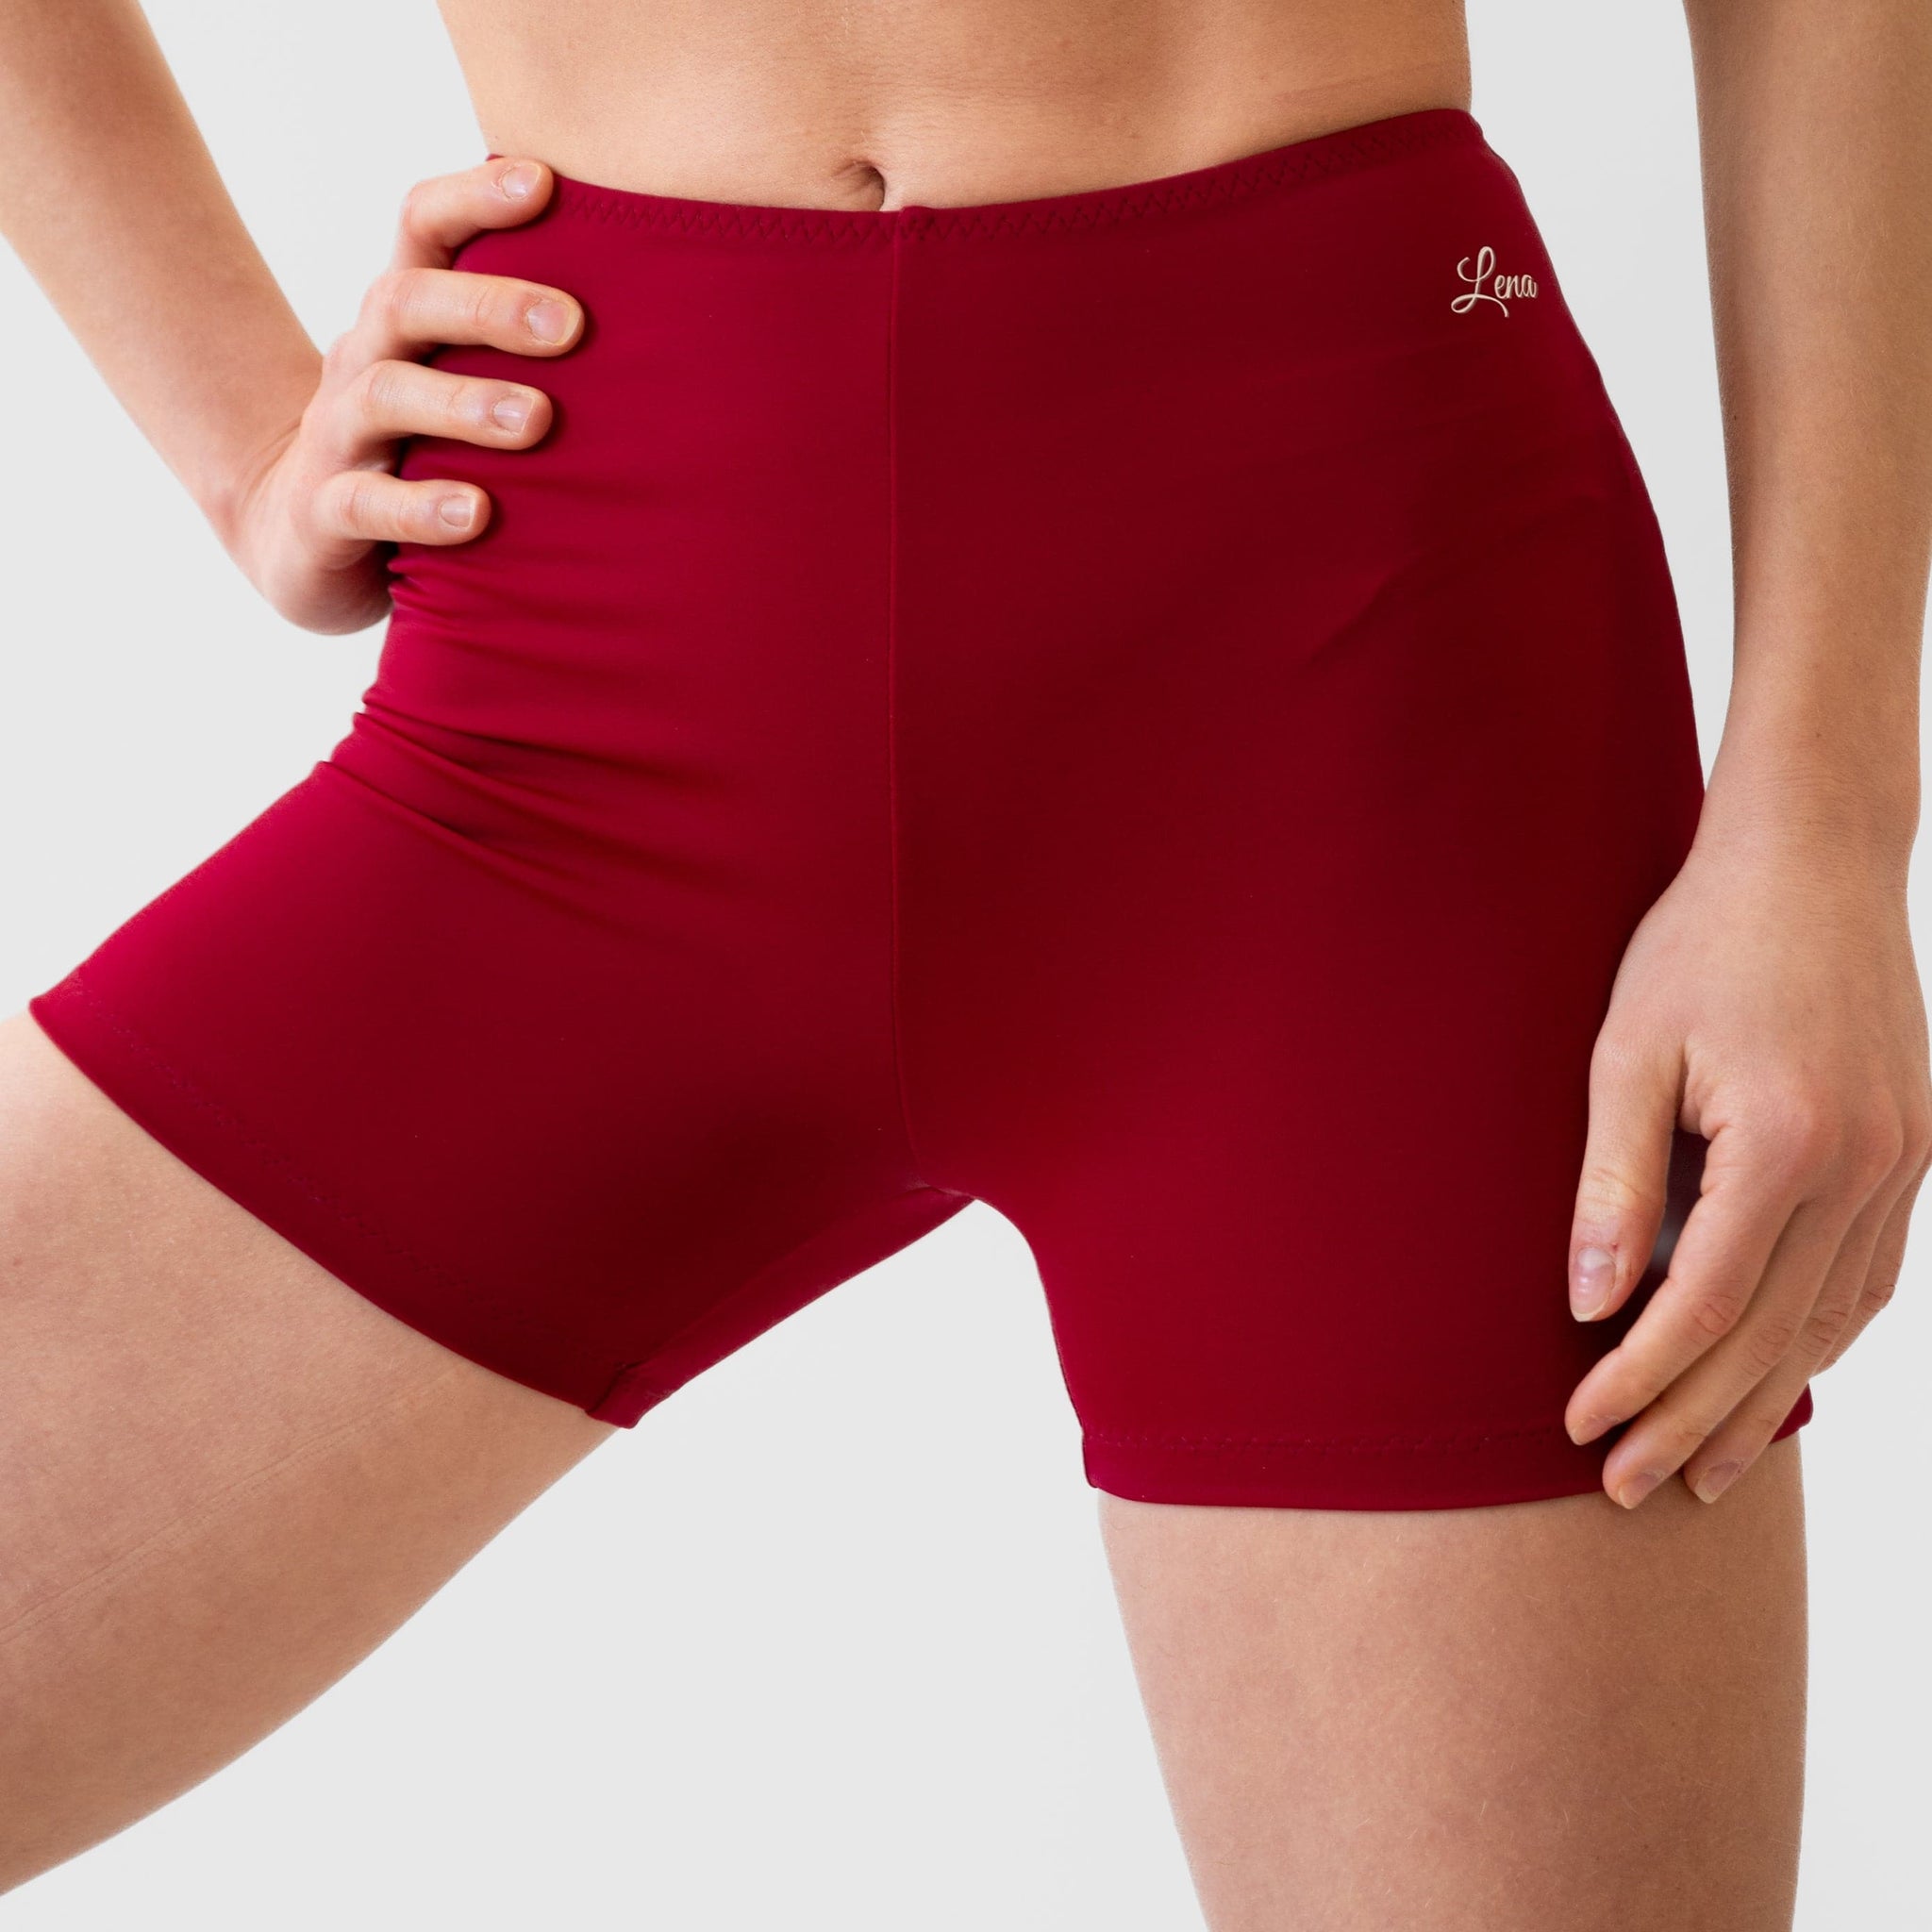 Bordeaux Shorts for Women for Yoga and Fitness Workouts by LENA Activewear